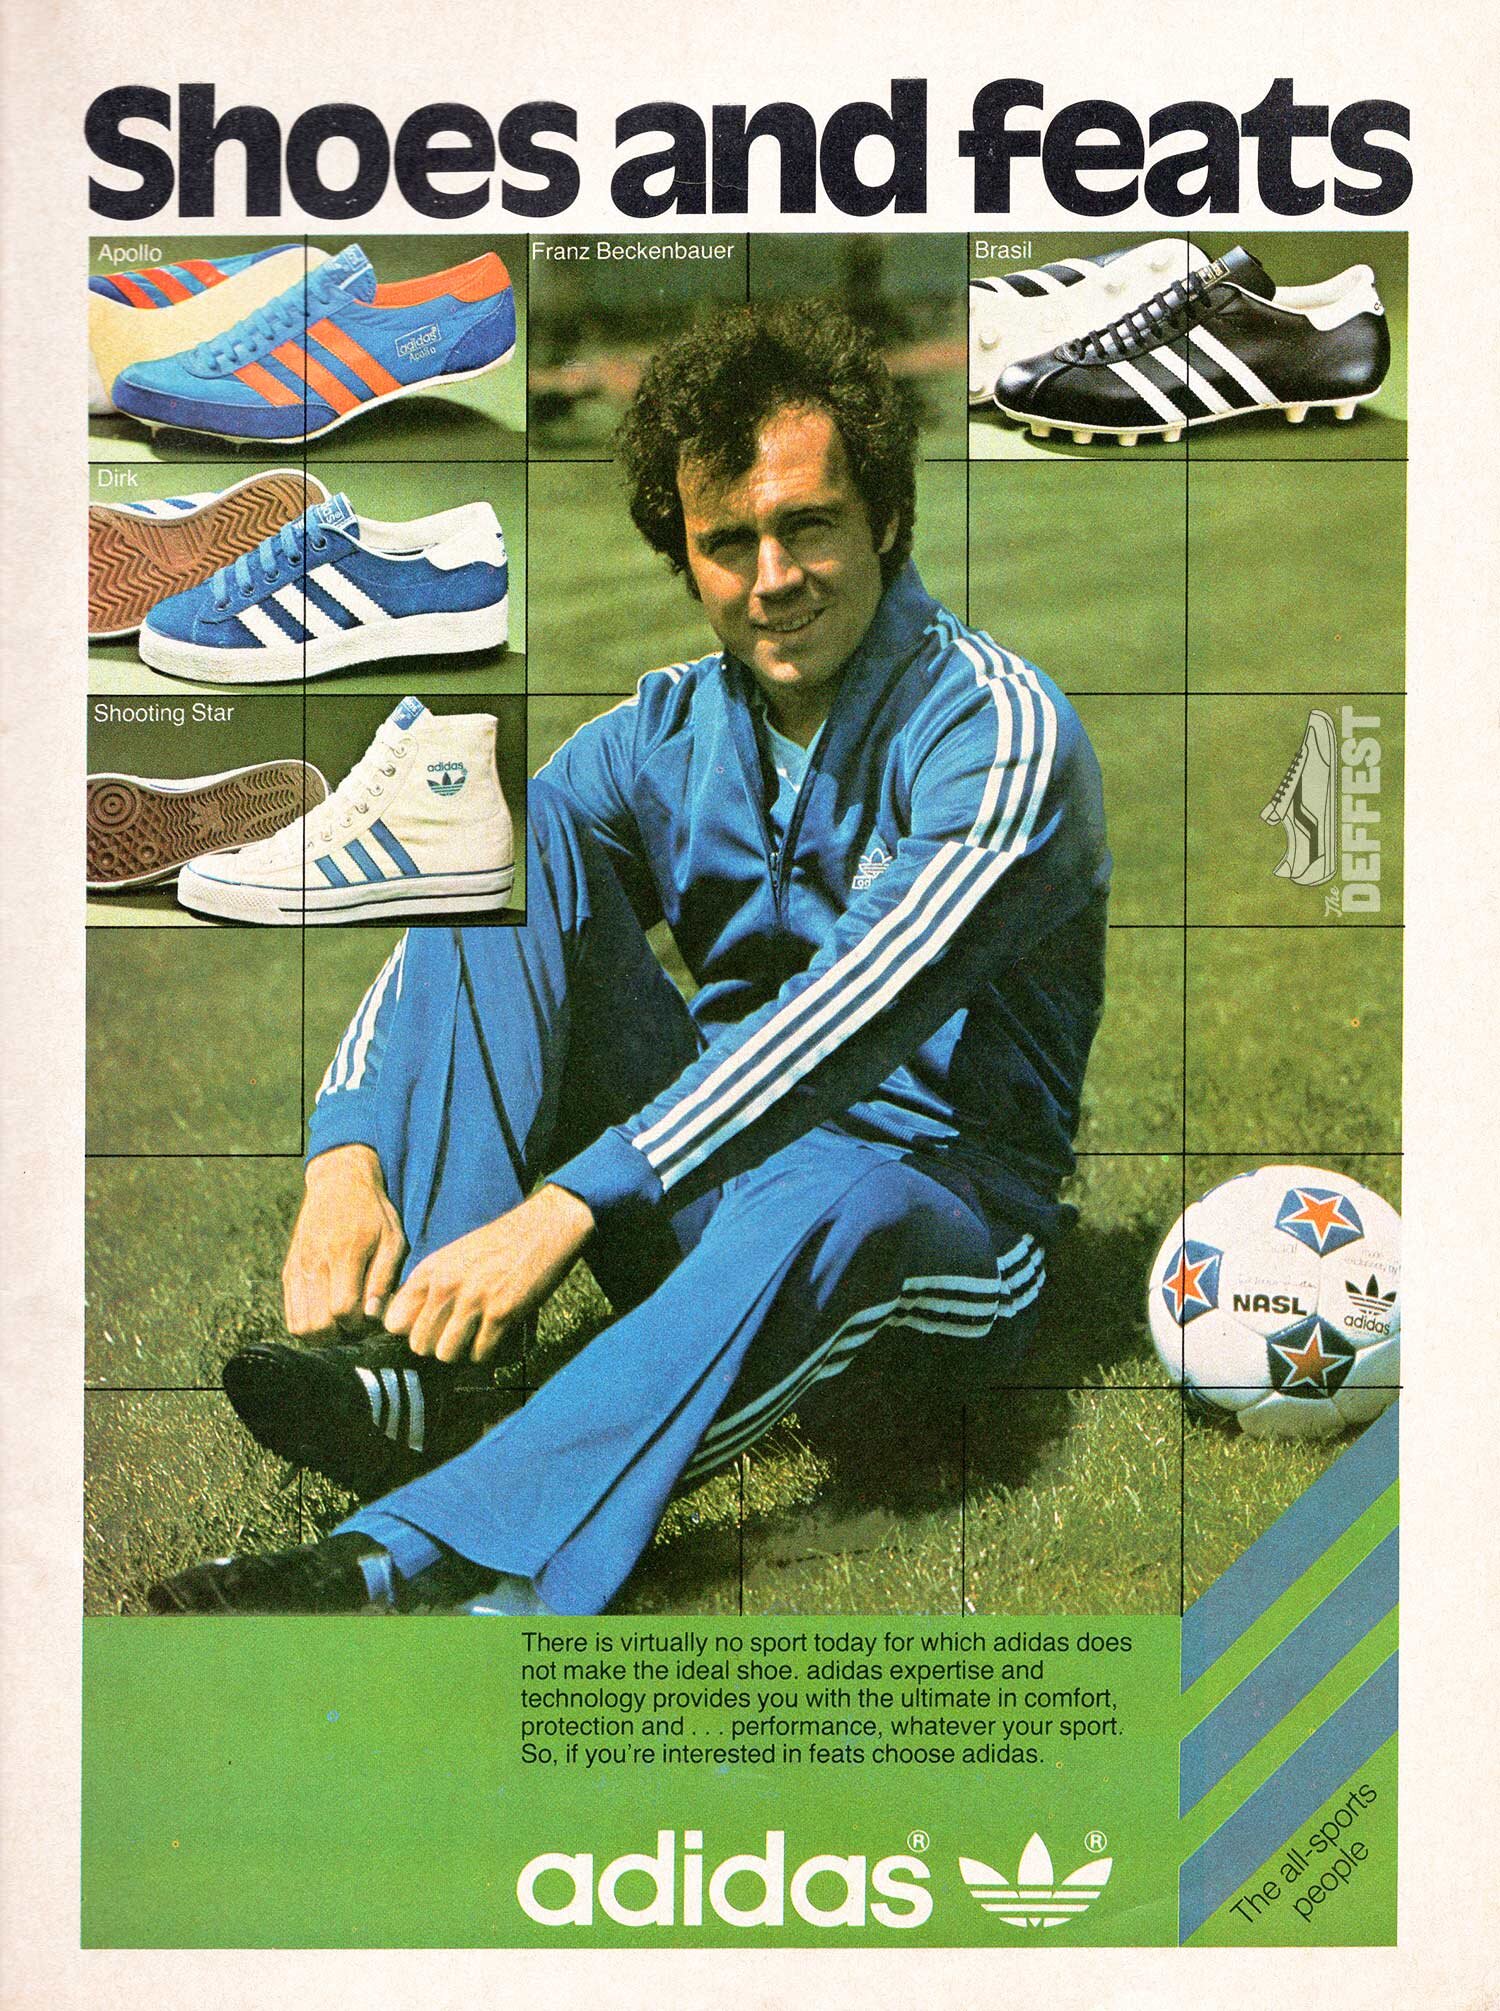 adidas Apollo — The Deffest®. A vintage and retro sneaker — Vintage Ads